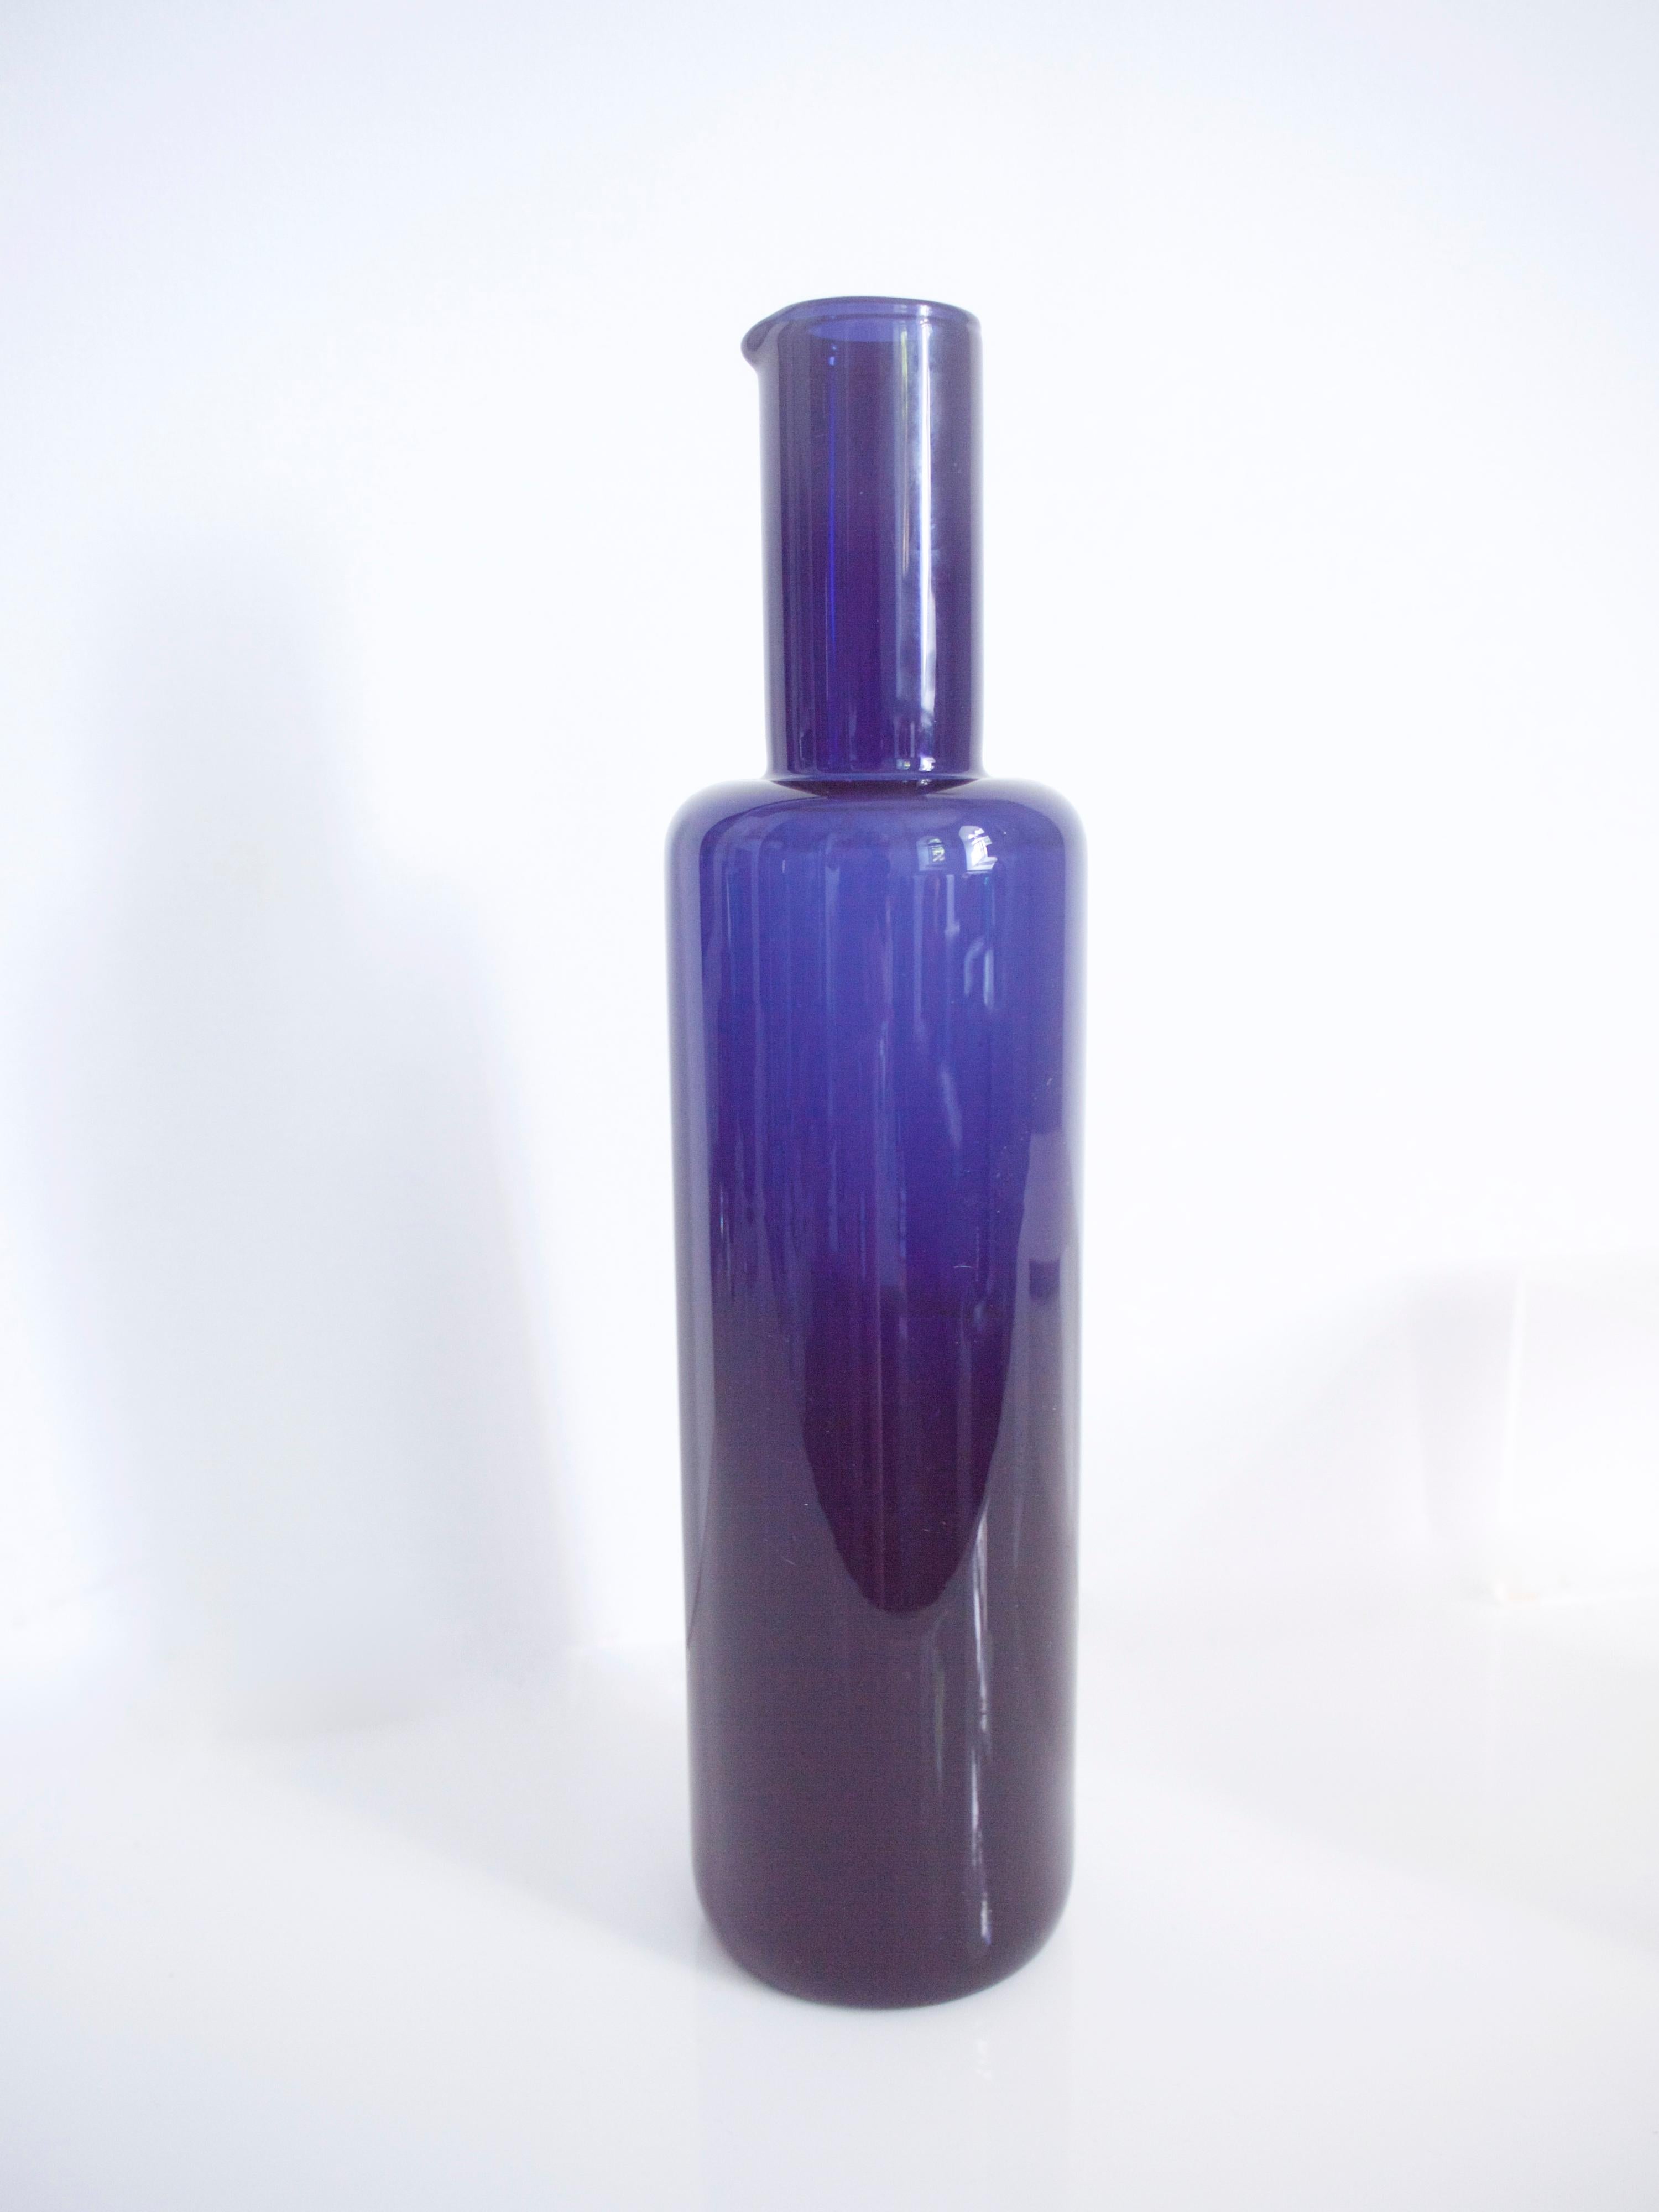 Timo Sarpaneva style Scandinavian decanter early 1960s the form and function of the decanter suggests Sarpaneva, the cobalt blue glass, Holmegaard.

Measures: Height 30 cms
Diameter 7.5 cms
Weight 0.570 kgs.



 